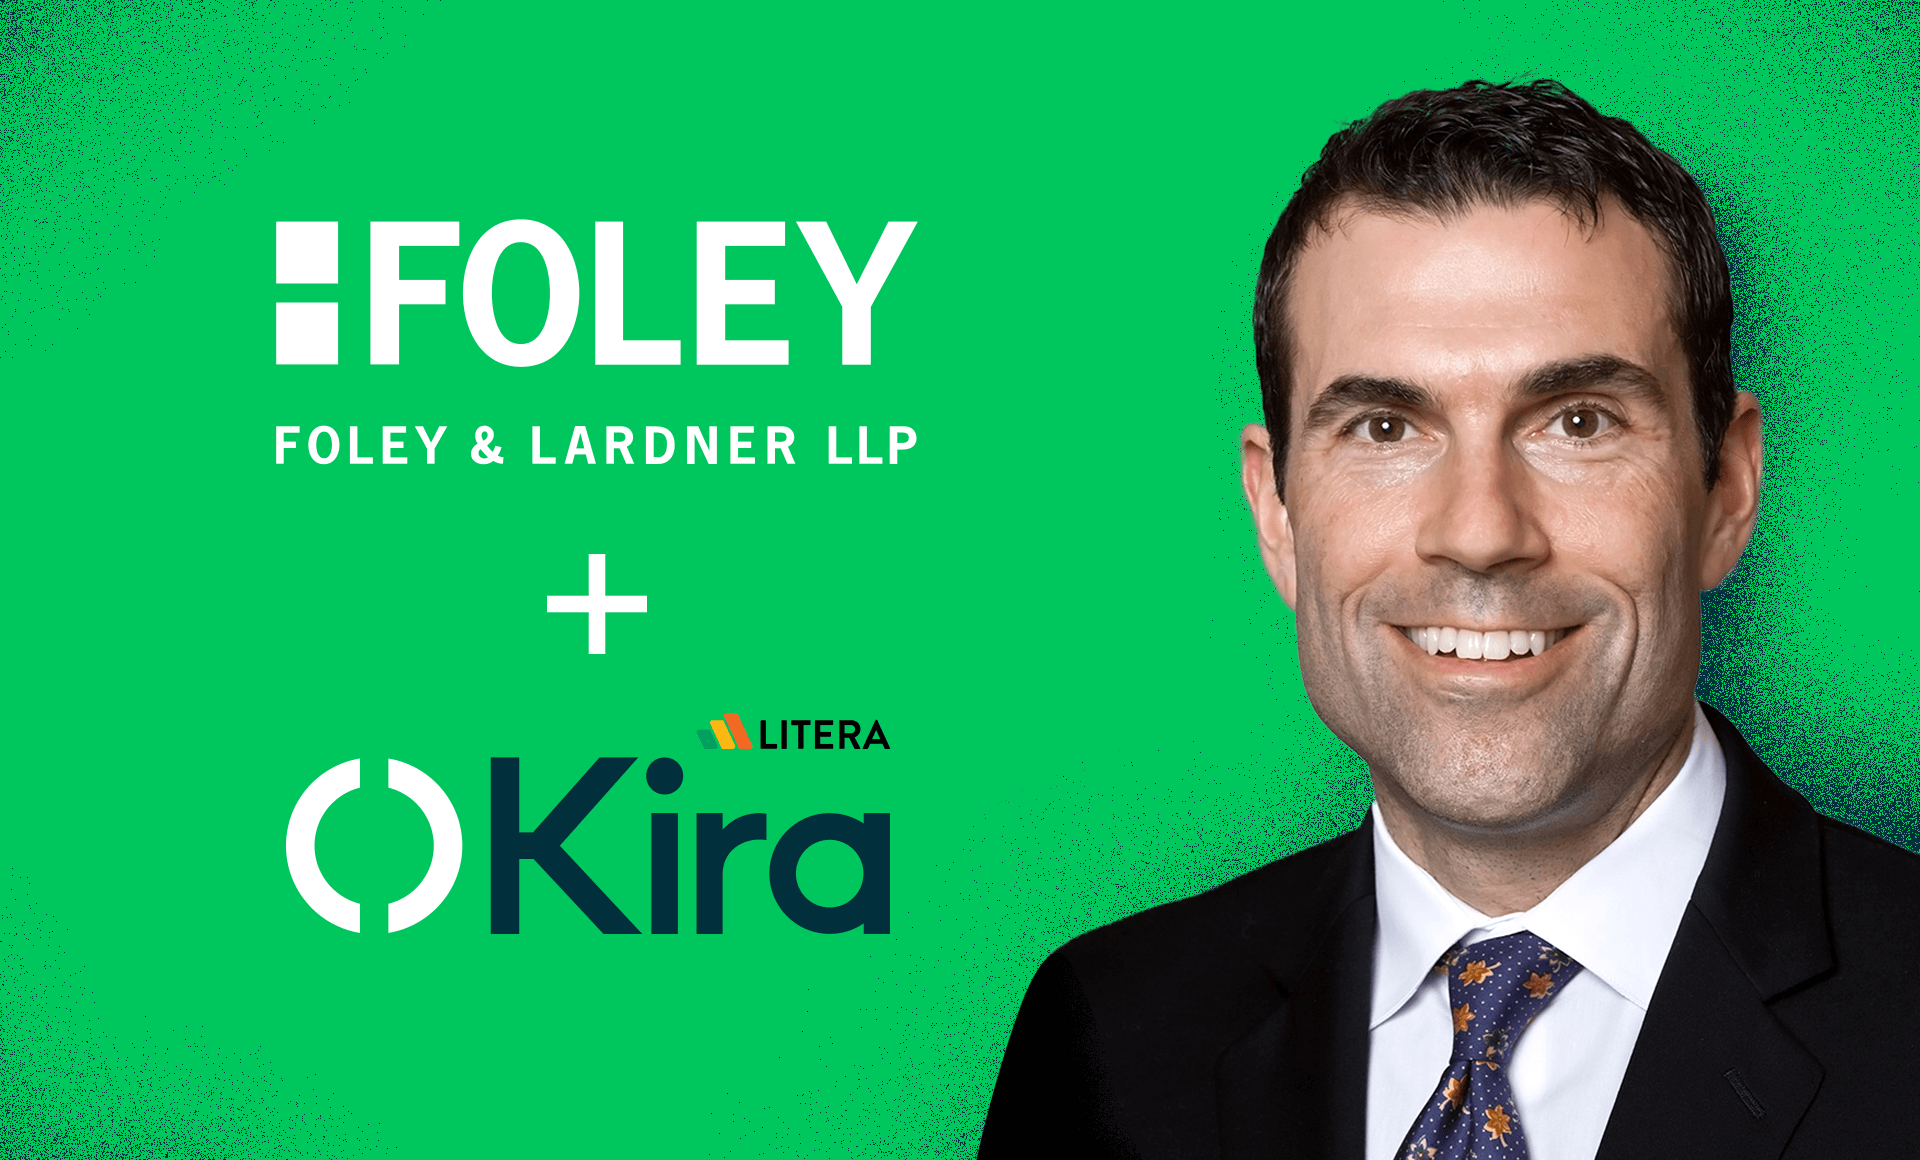 Read the announcement: Foley & Lardner Adopts Kira Across Its Mergers and Acquisitions Practice To Enhance Due Diligence Processes